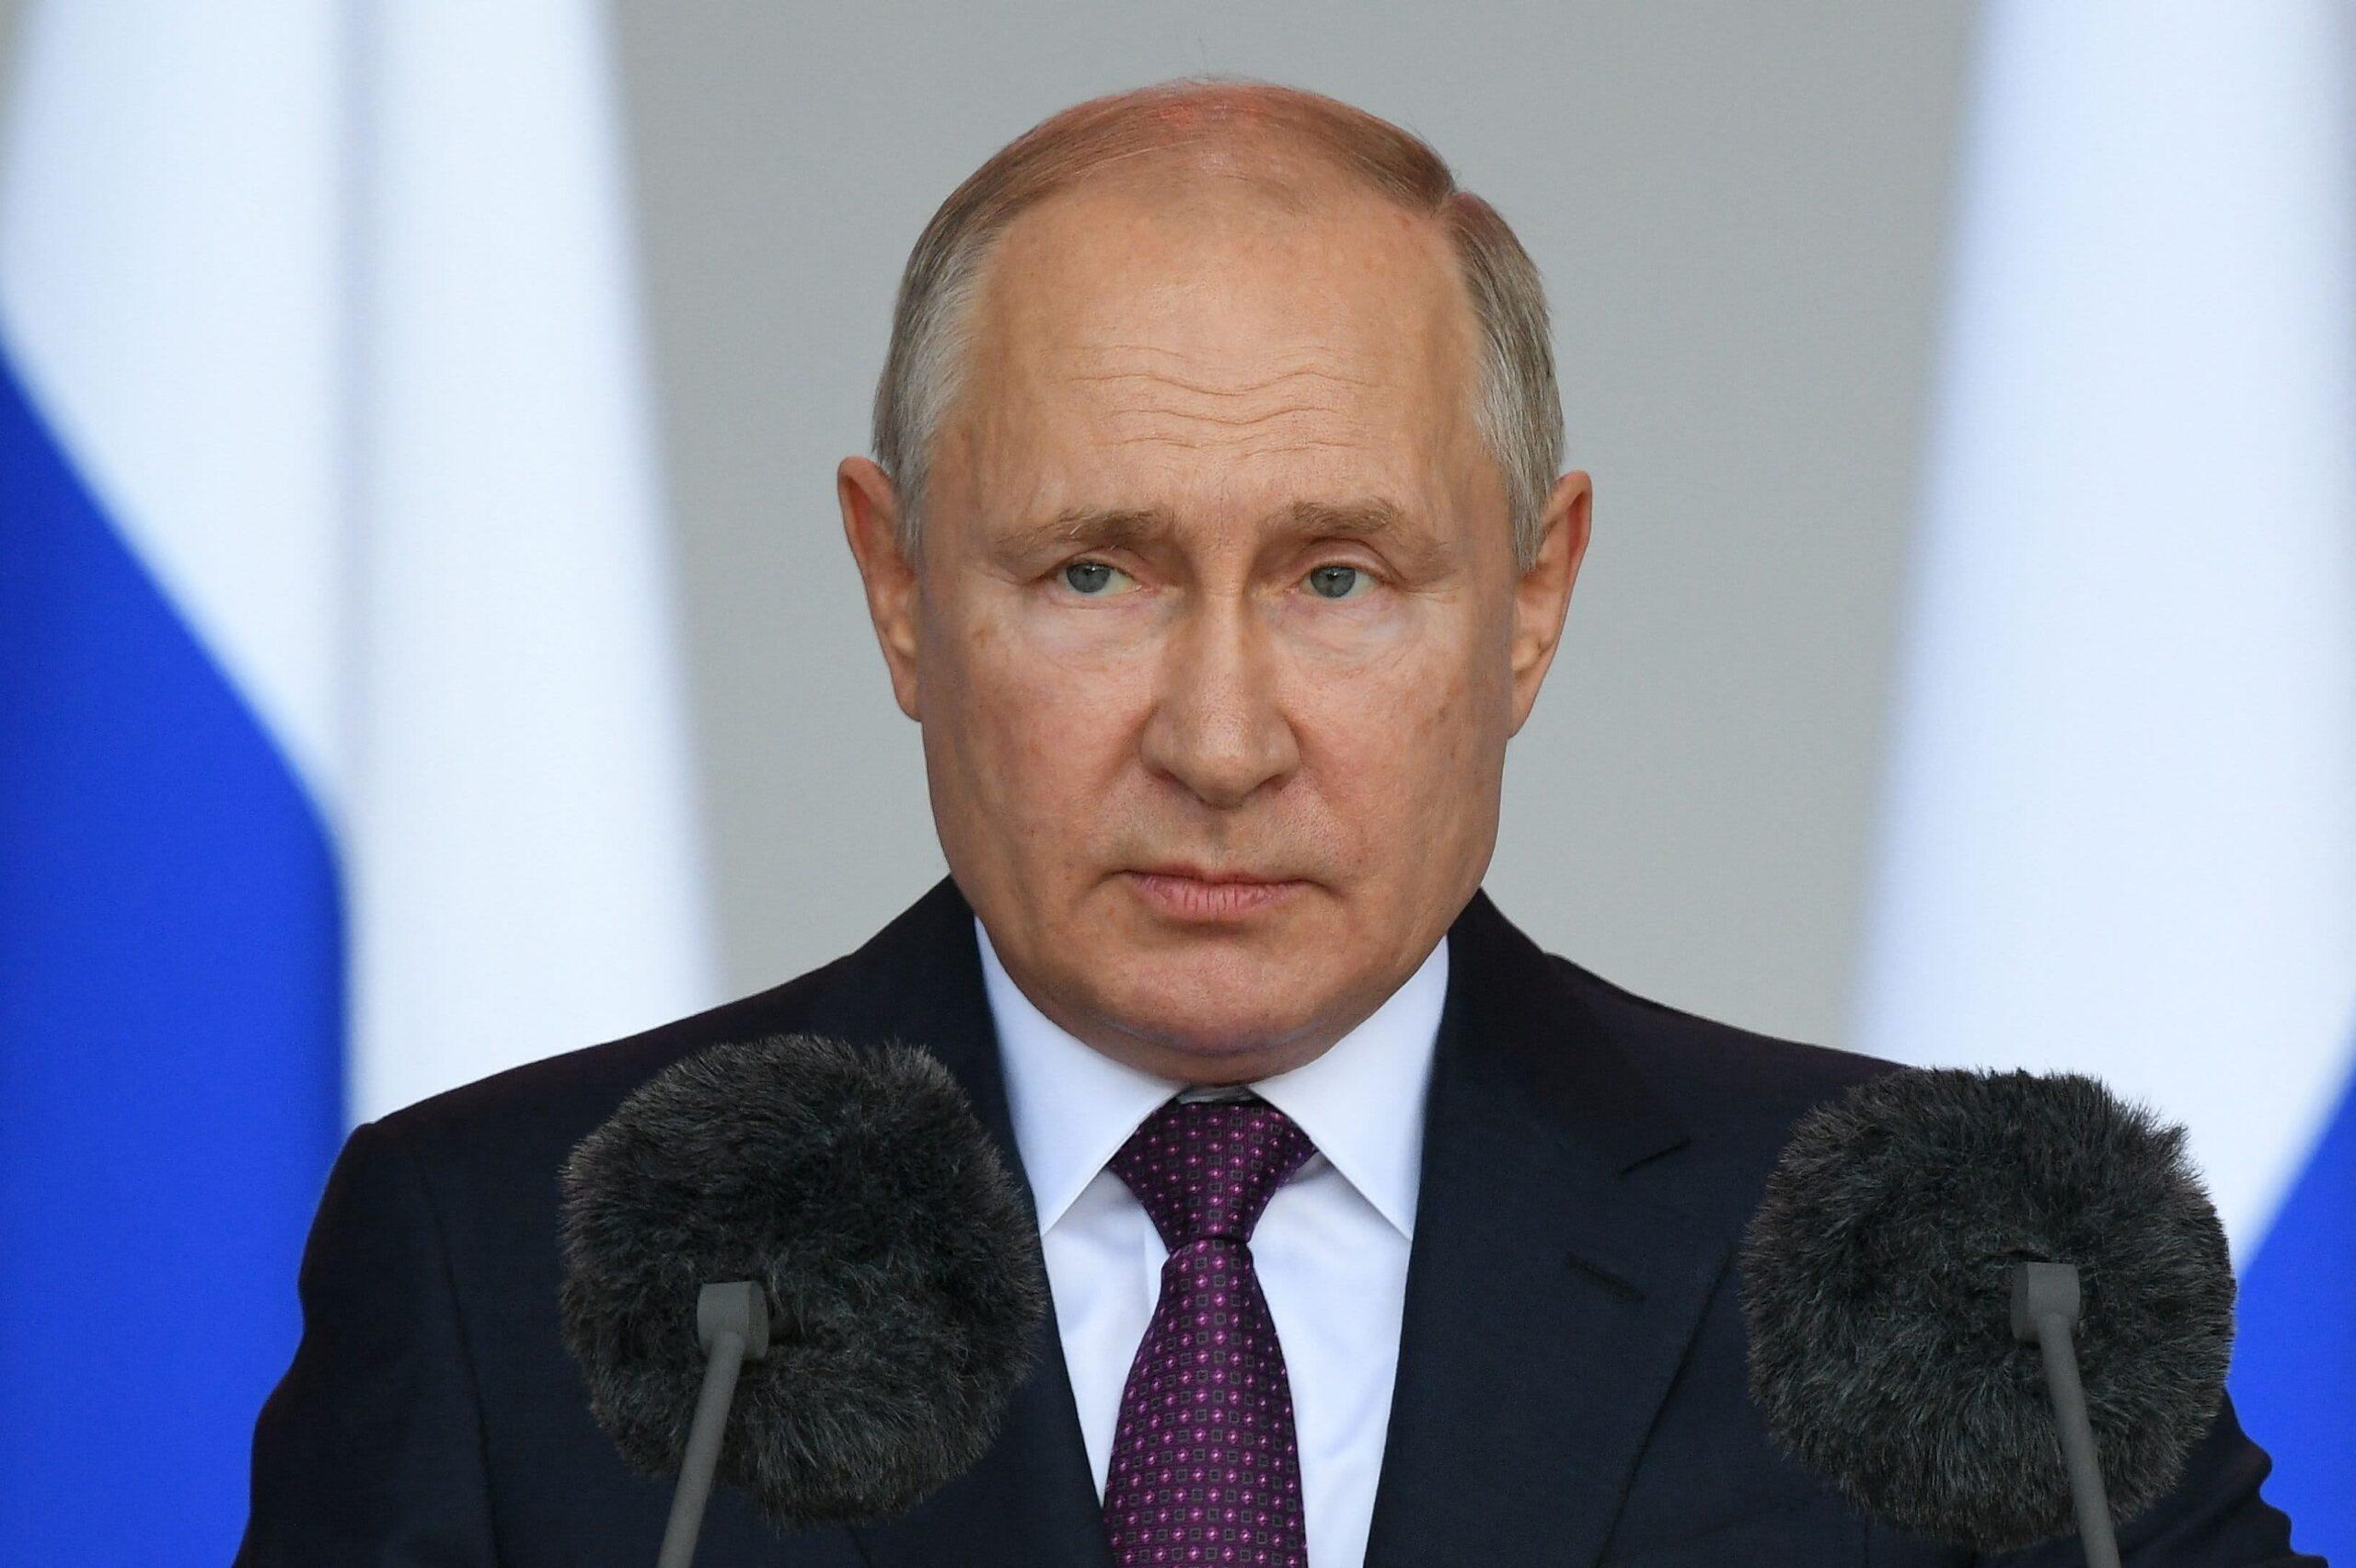 Russia’s Vladimir Putin slammed Western sanctions as ‘mad and foolish’ and urged Russia’s main firms to continue operating in the country.